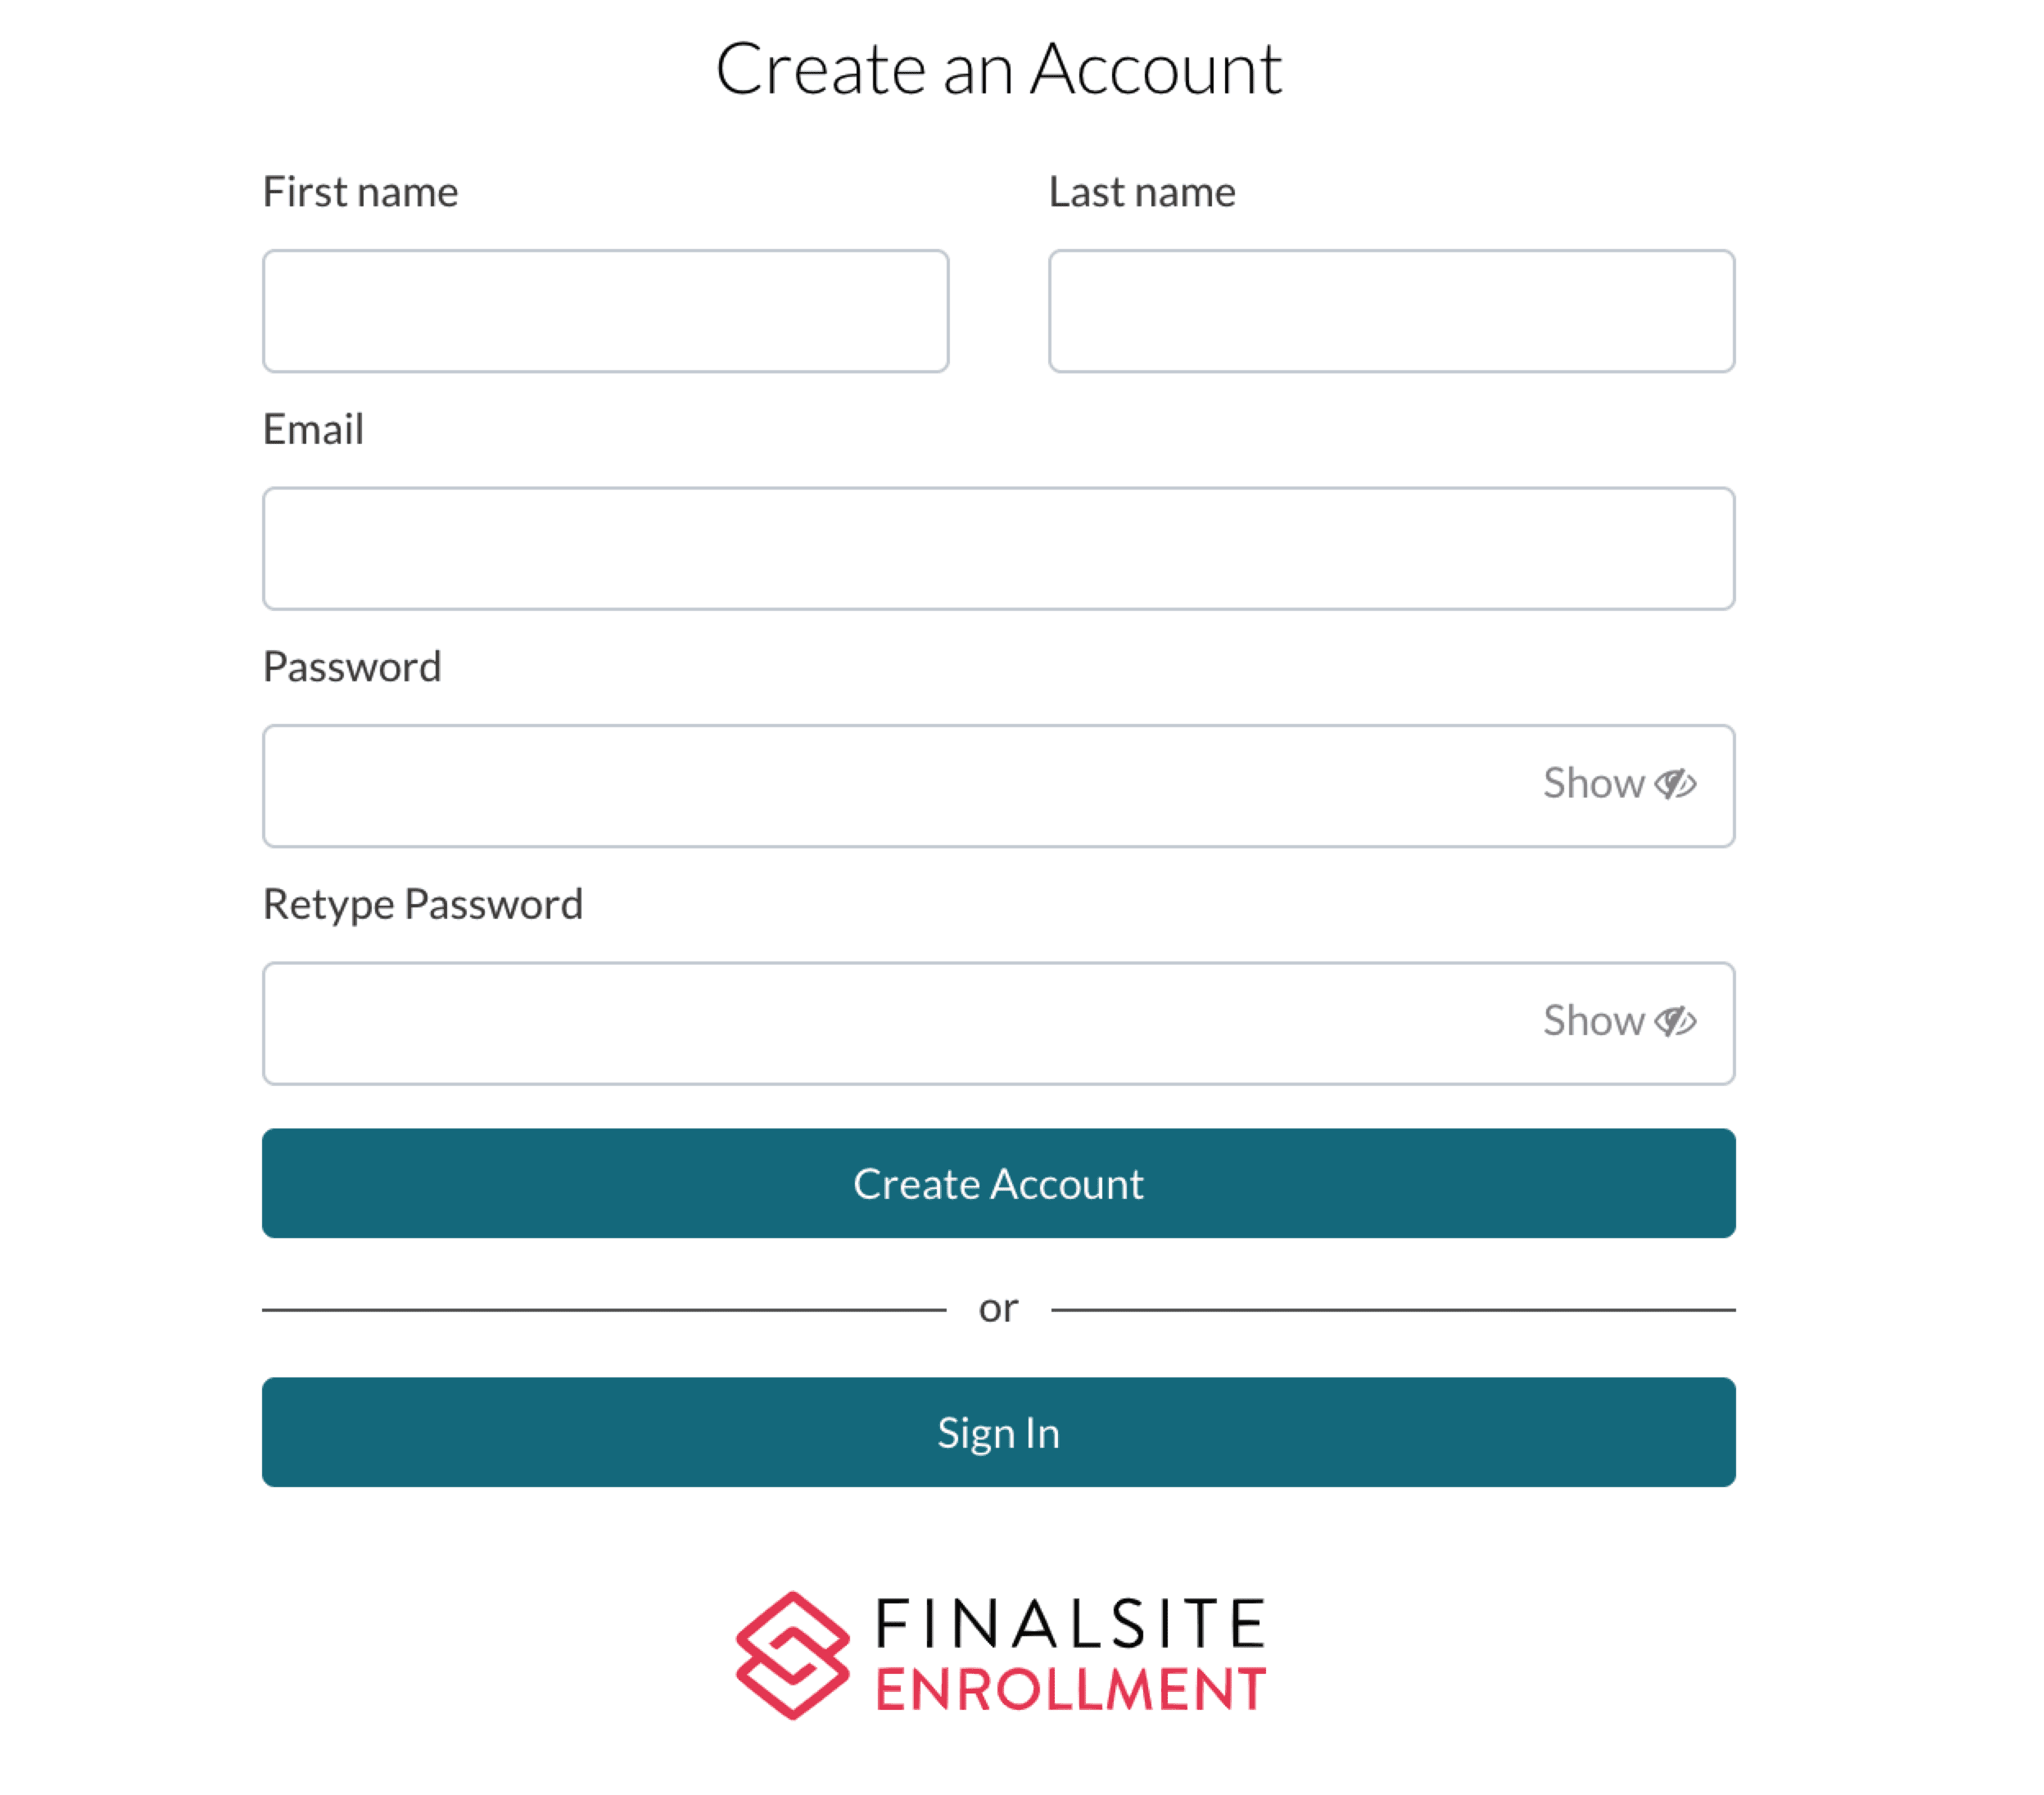 Create an Account Page